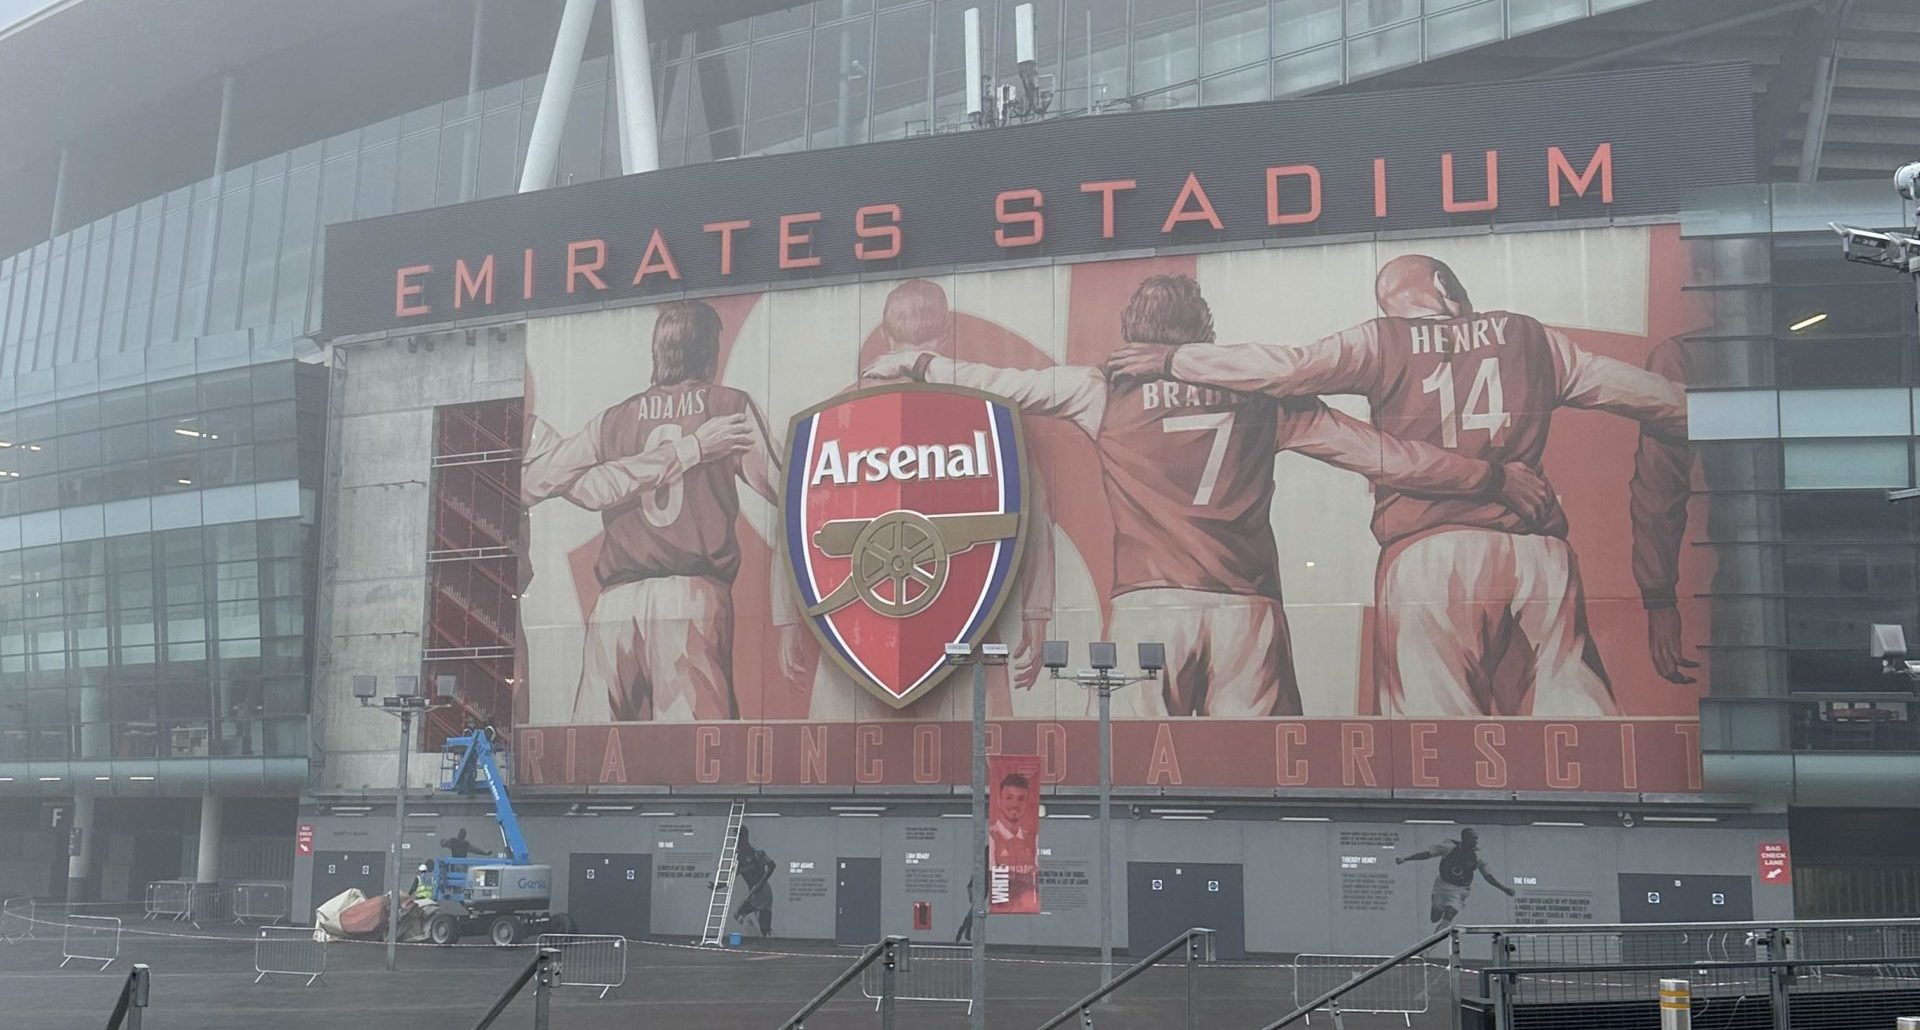 Arsenal v Newcastle kick-off time moved for broadcasters